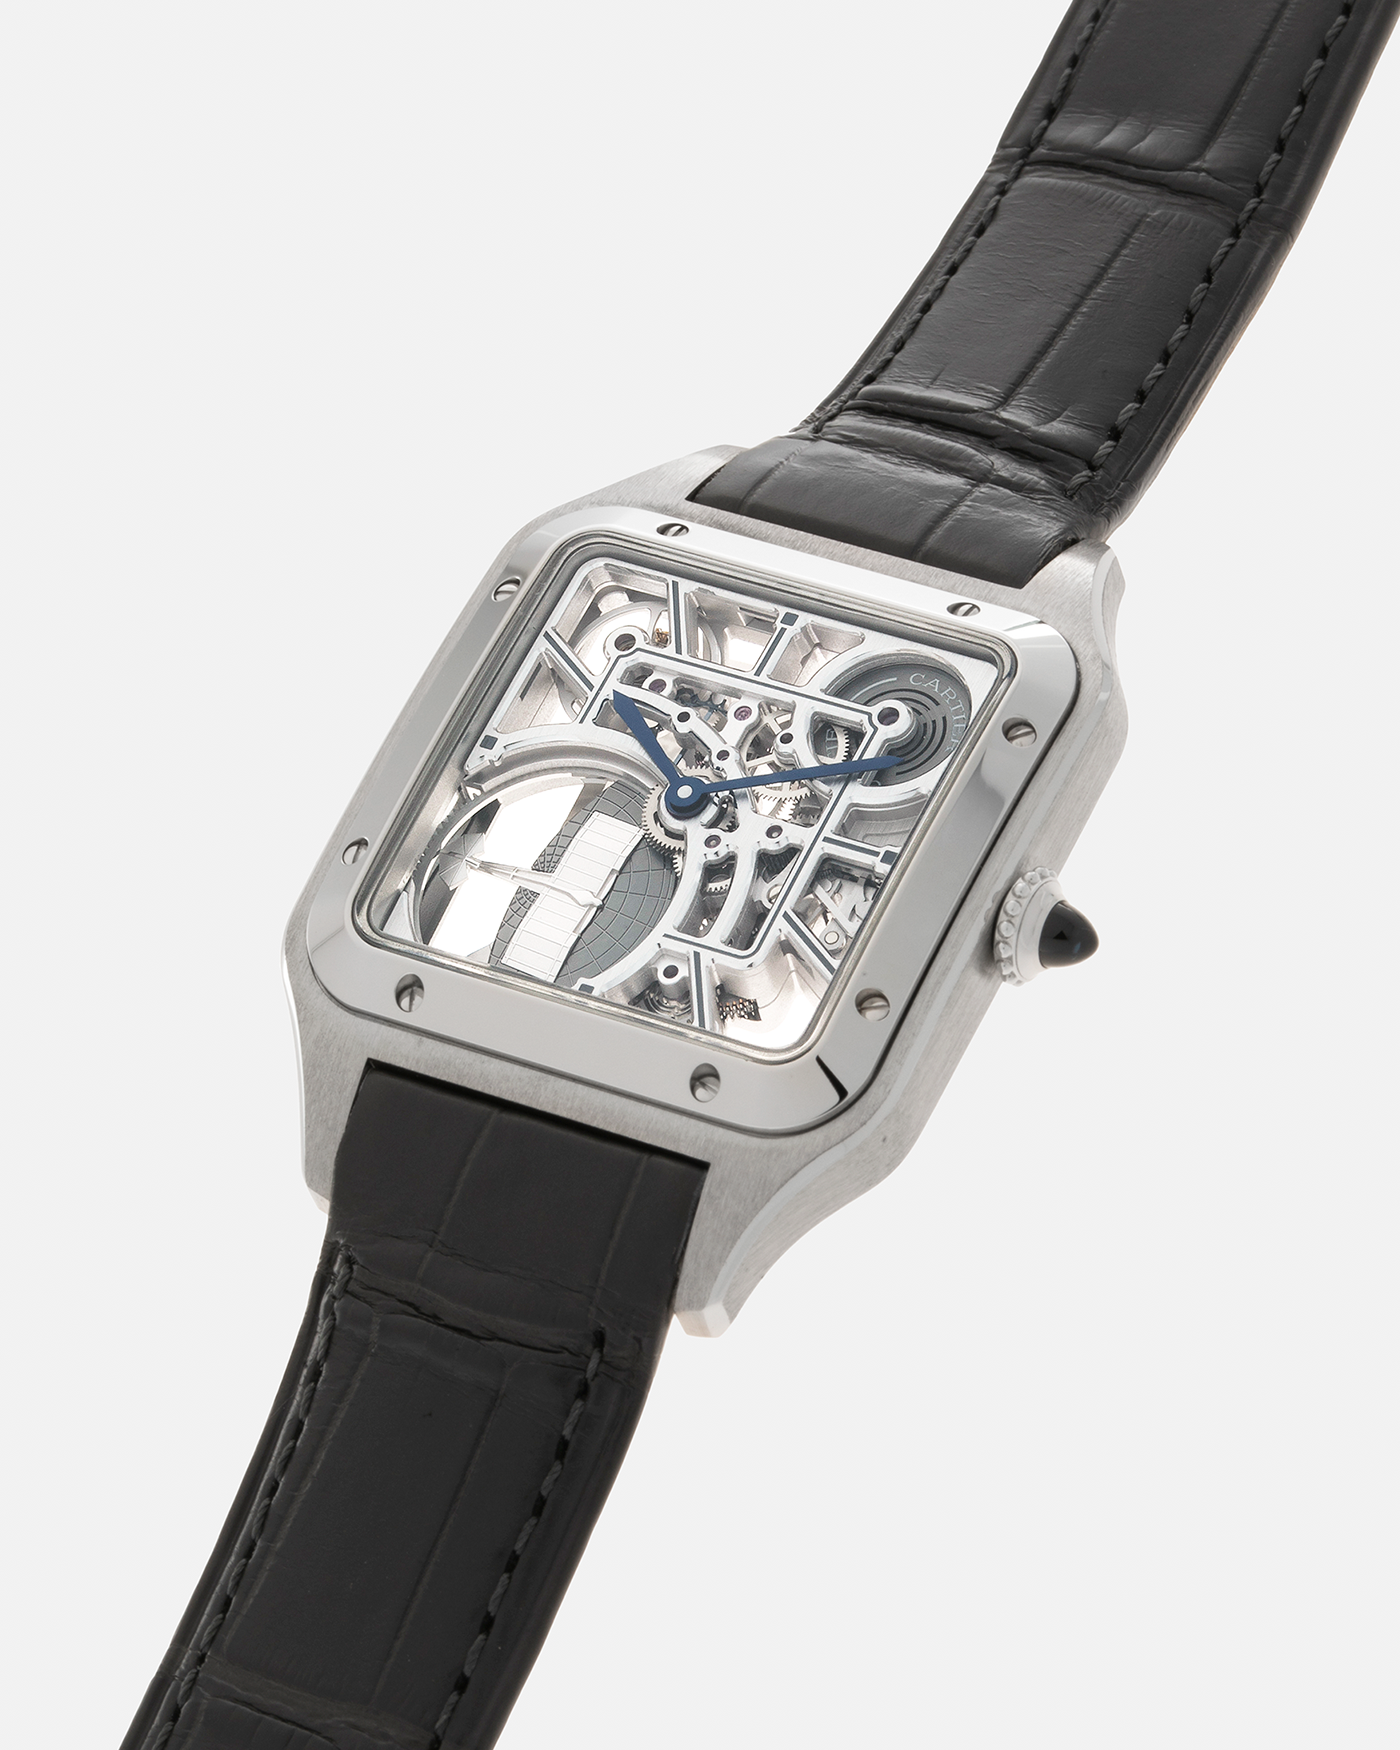 Brand: Cartier Year: 2023 Model: Santos Dumont Skeleton MicroRotor Reference: CRWHSA0032 Material: Stainless Steel Movement: Cartier Cal. 9629 MC, Self-Winding Micro-Rotor Case Diameter: 31.4mm x 43.5mm Strap: Cartier Grey Alligator Leather Strap with Signed Stainless Steel Ardillon Buckle